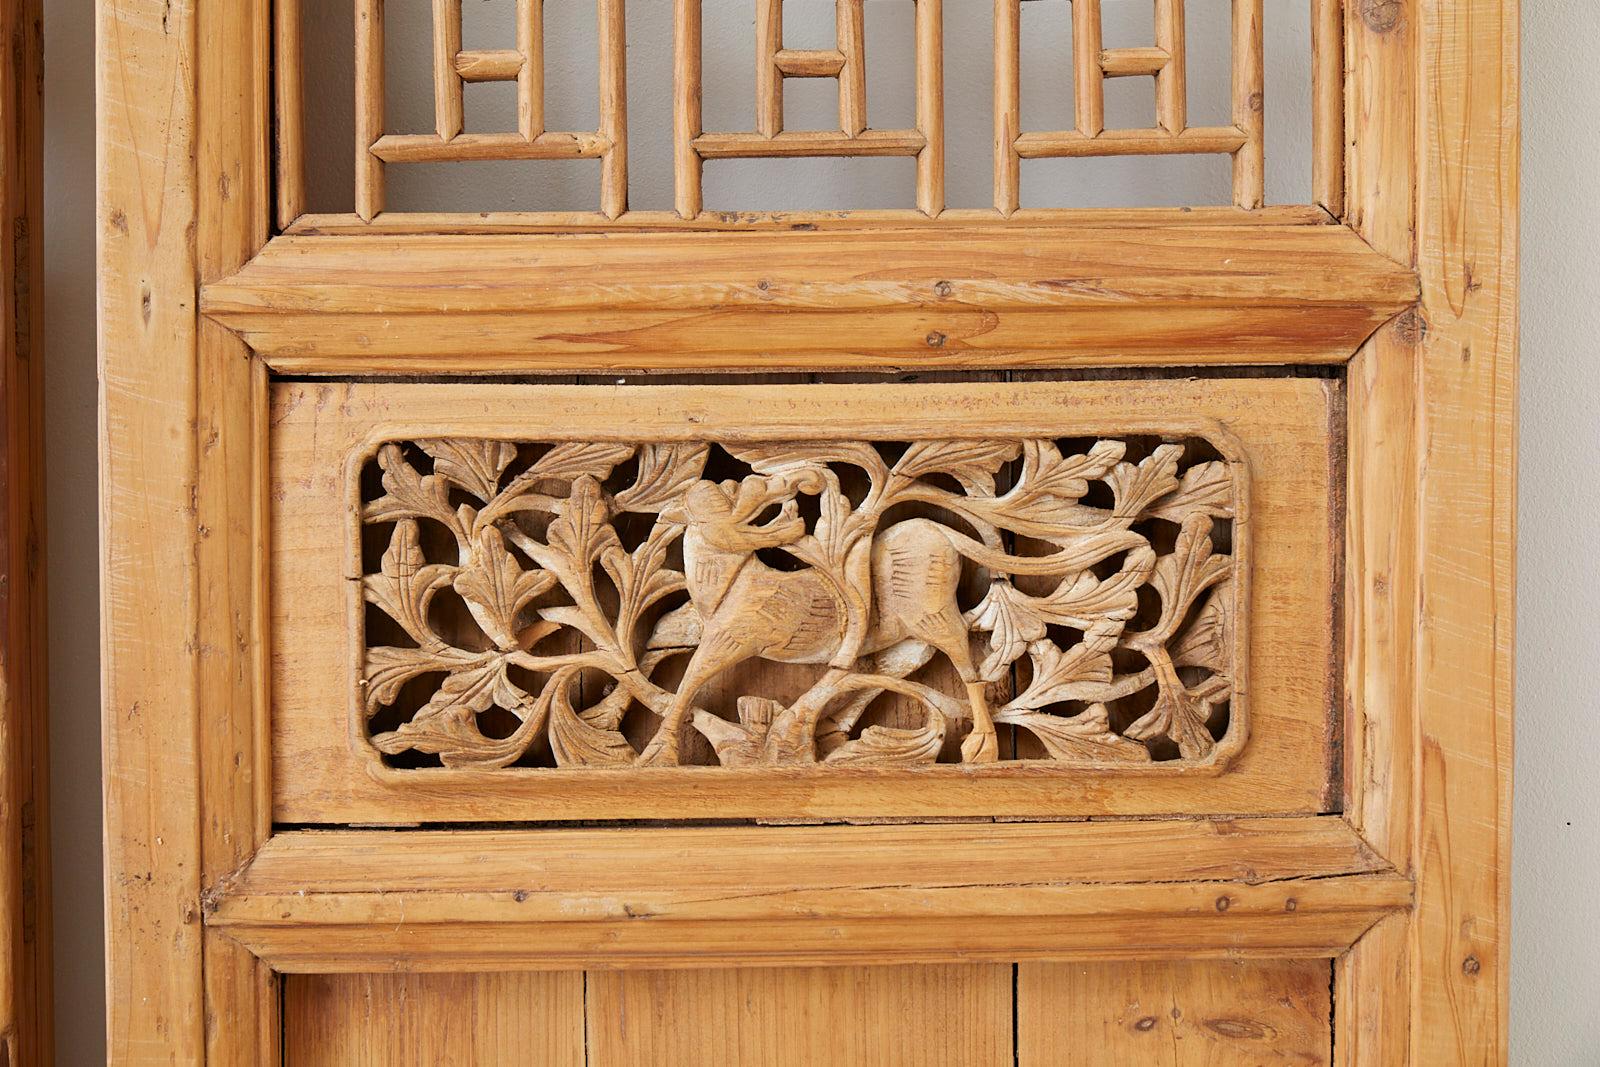 Ming Pair of Chinese Carved Doors with Lattice Windows